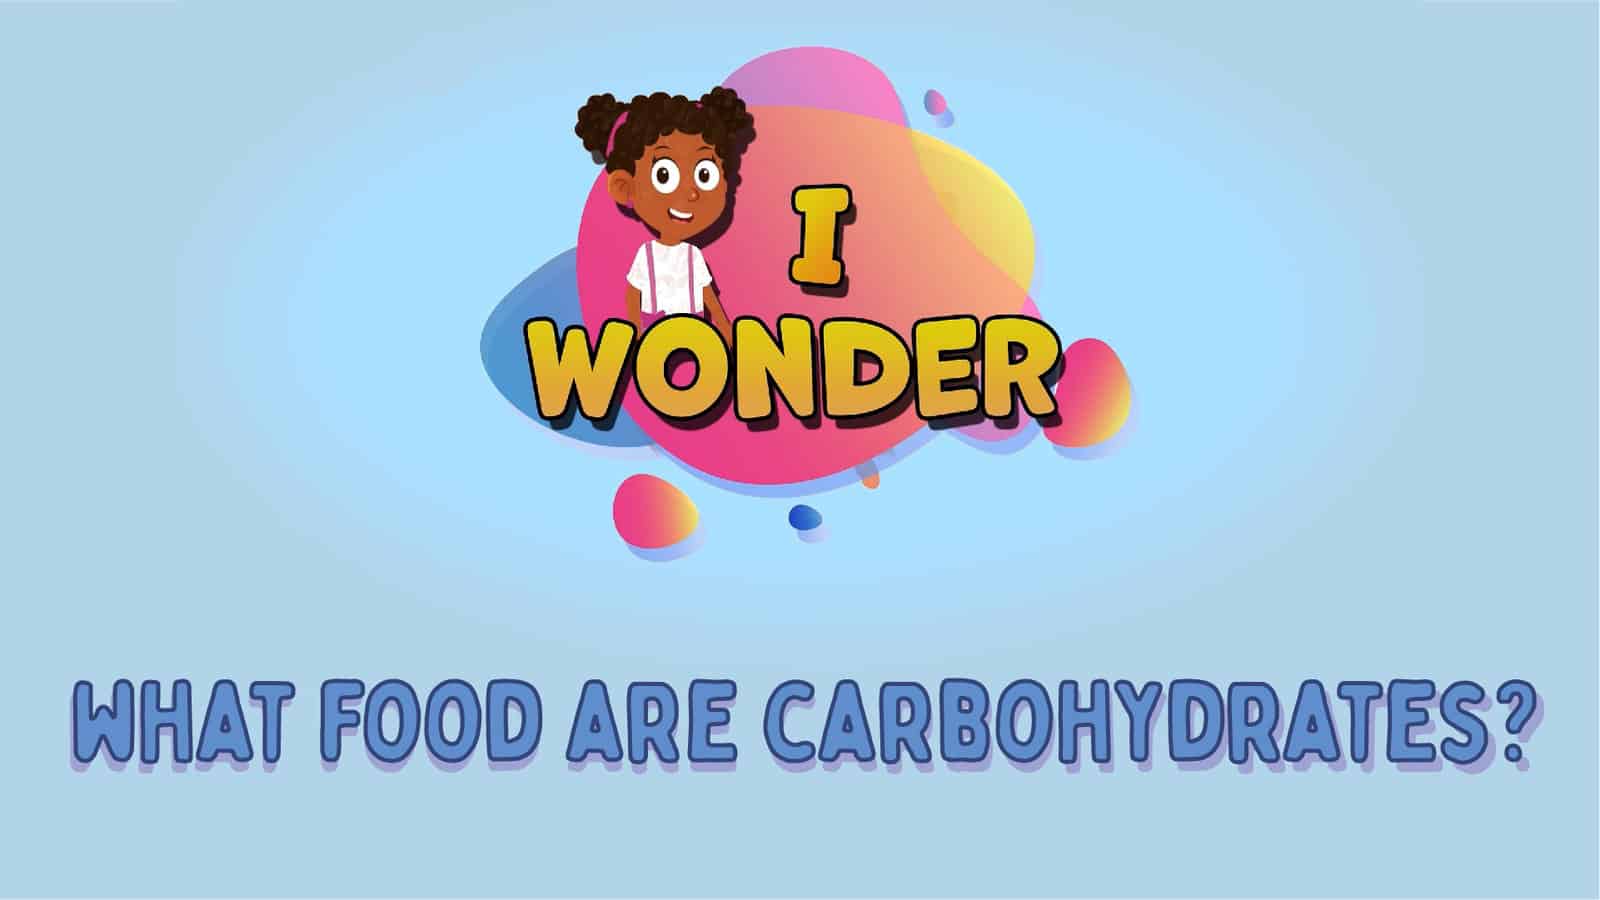 What Food Are Carbohydrates?